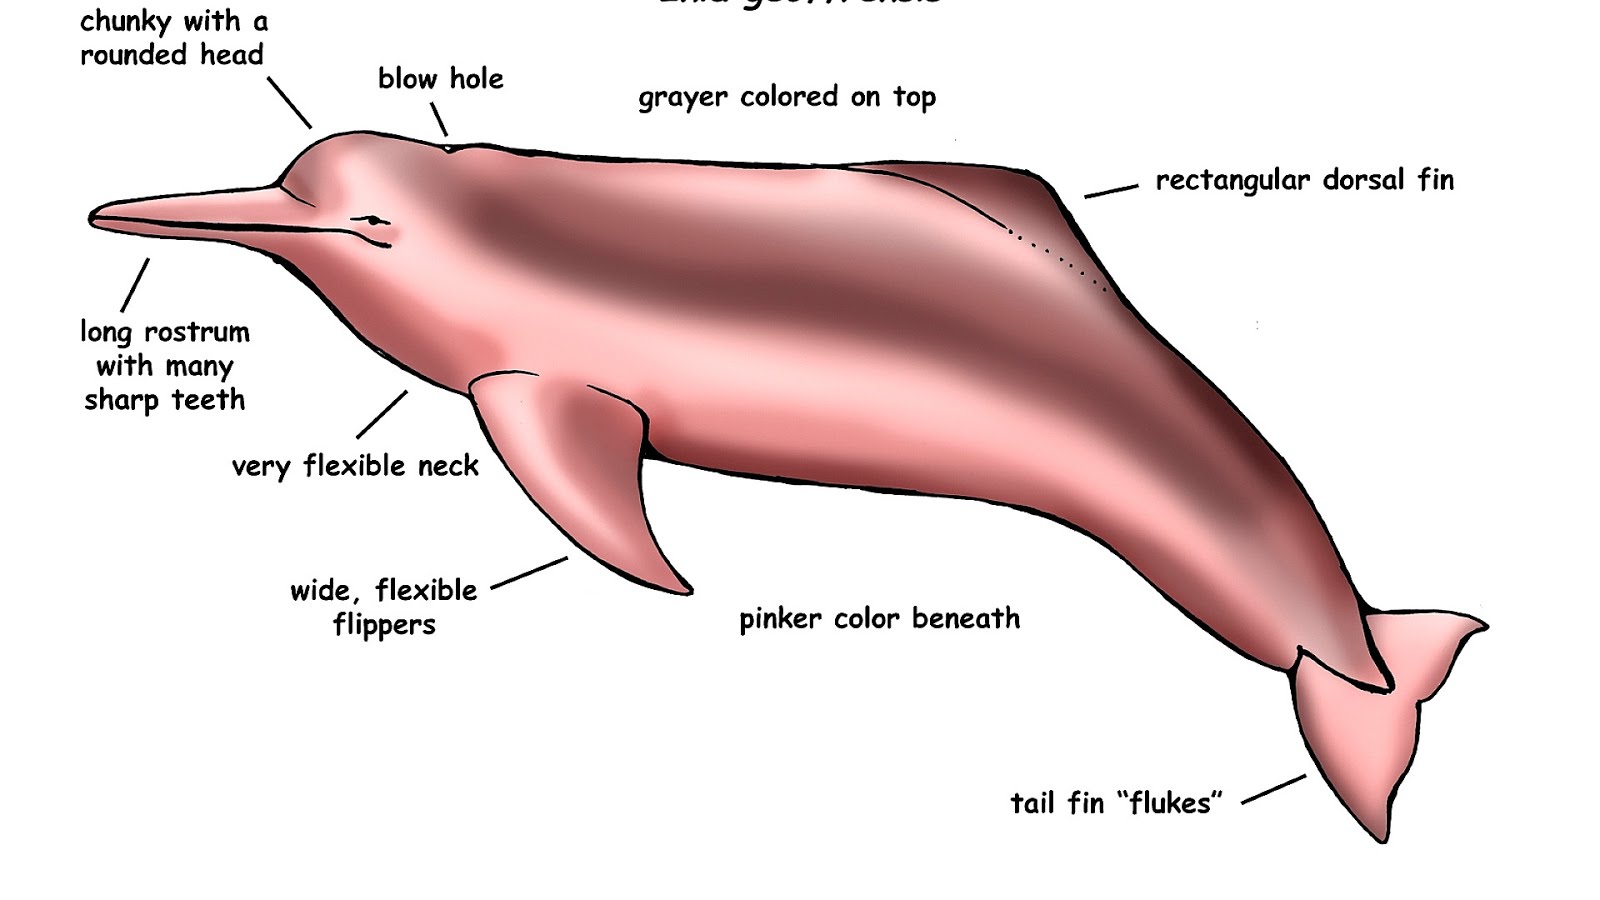 Under the Pink Surface: Fascinating Facts about the Pink River Dolphin